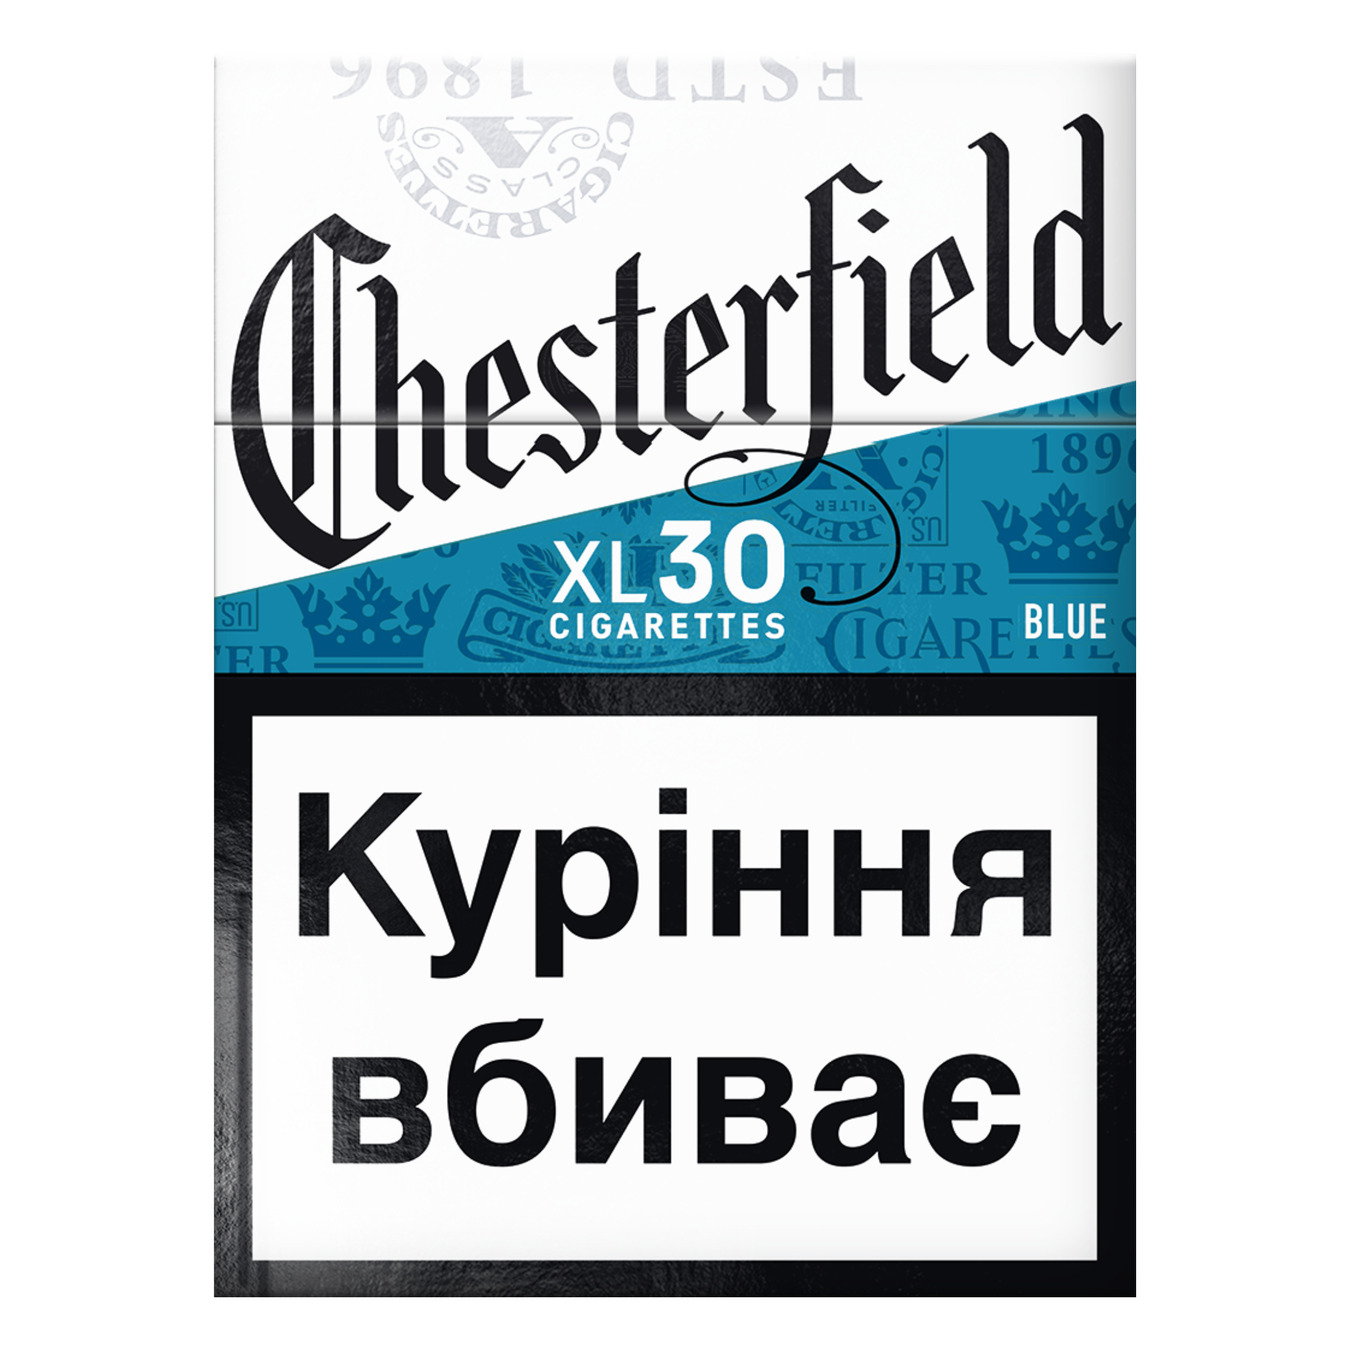 Chesterfield Blue KS cigarettes 30 pcs (the price is indicated without excise duty)